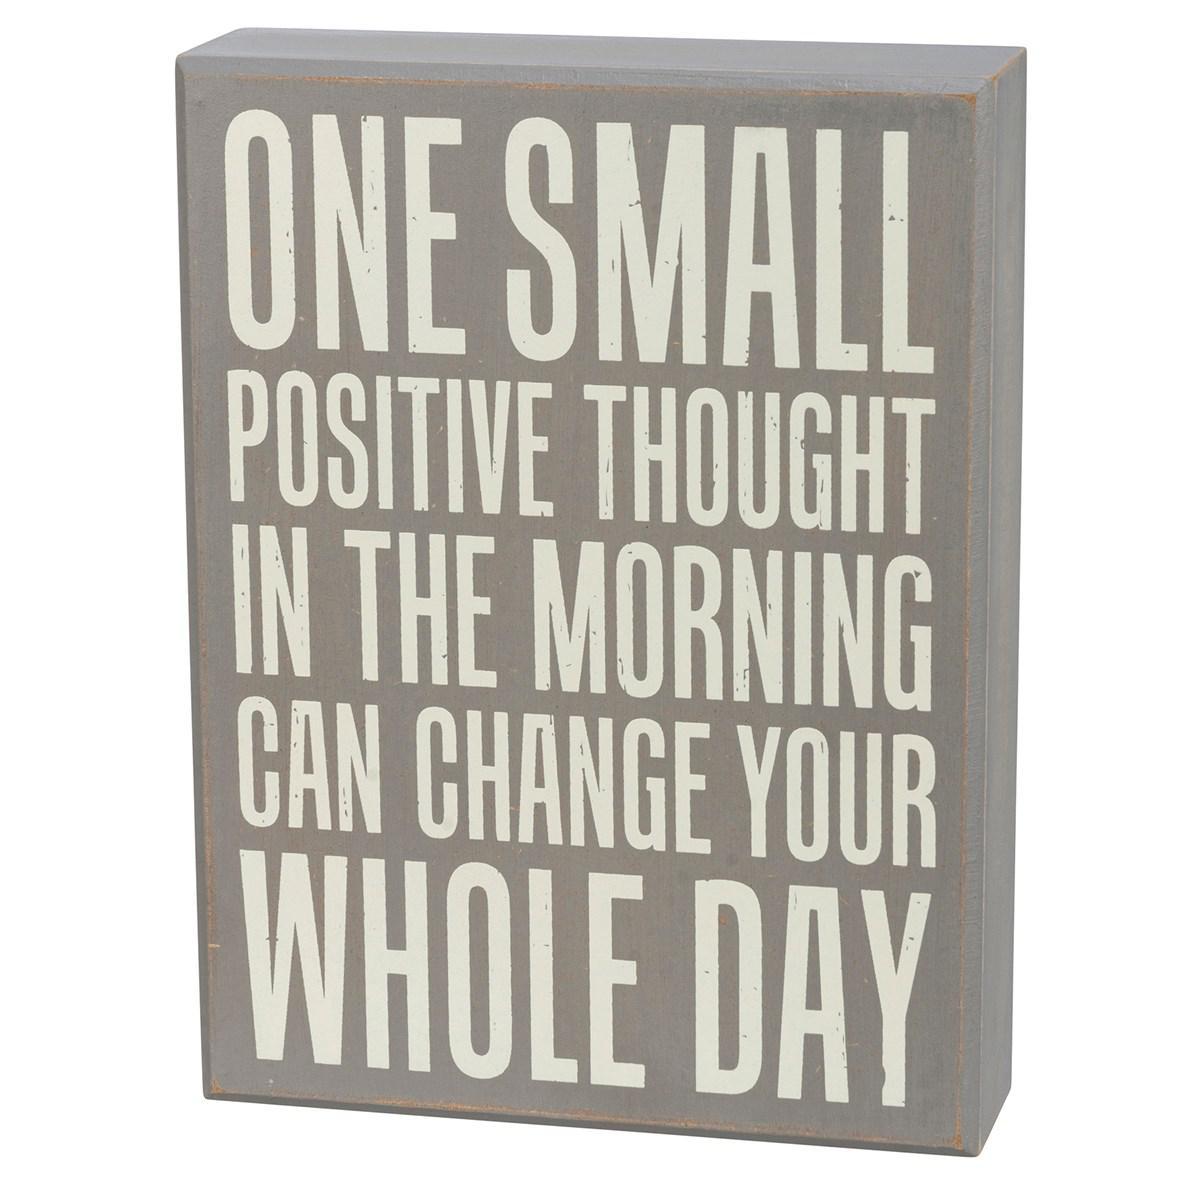 One Small Positive Thought In The Morning Can Change Your Whole Day Sign